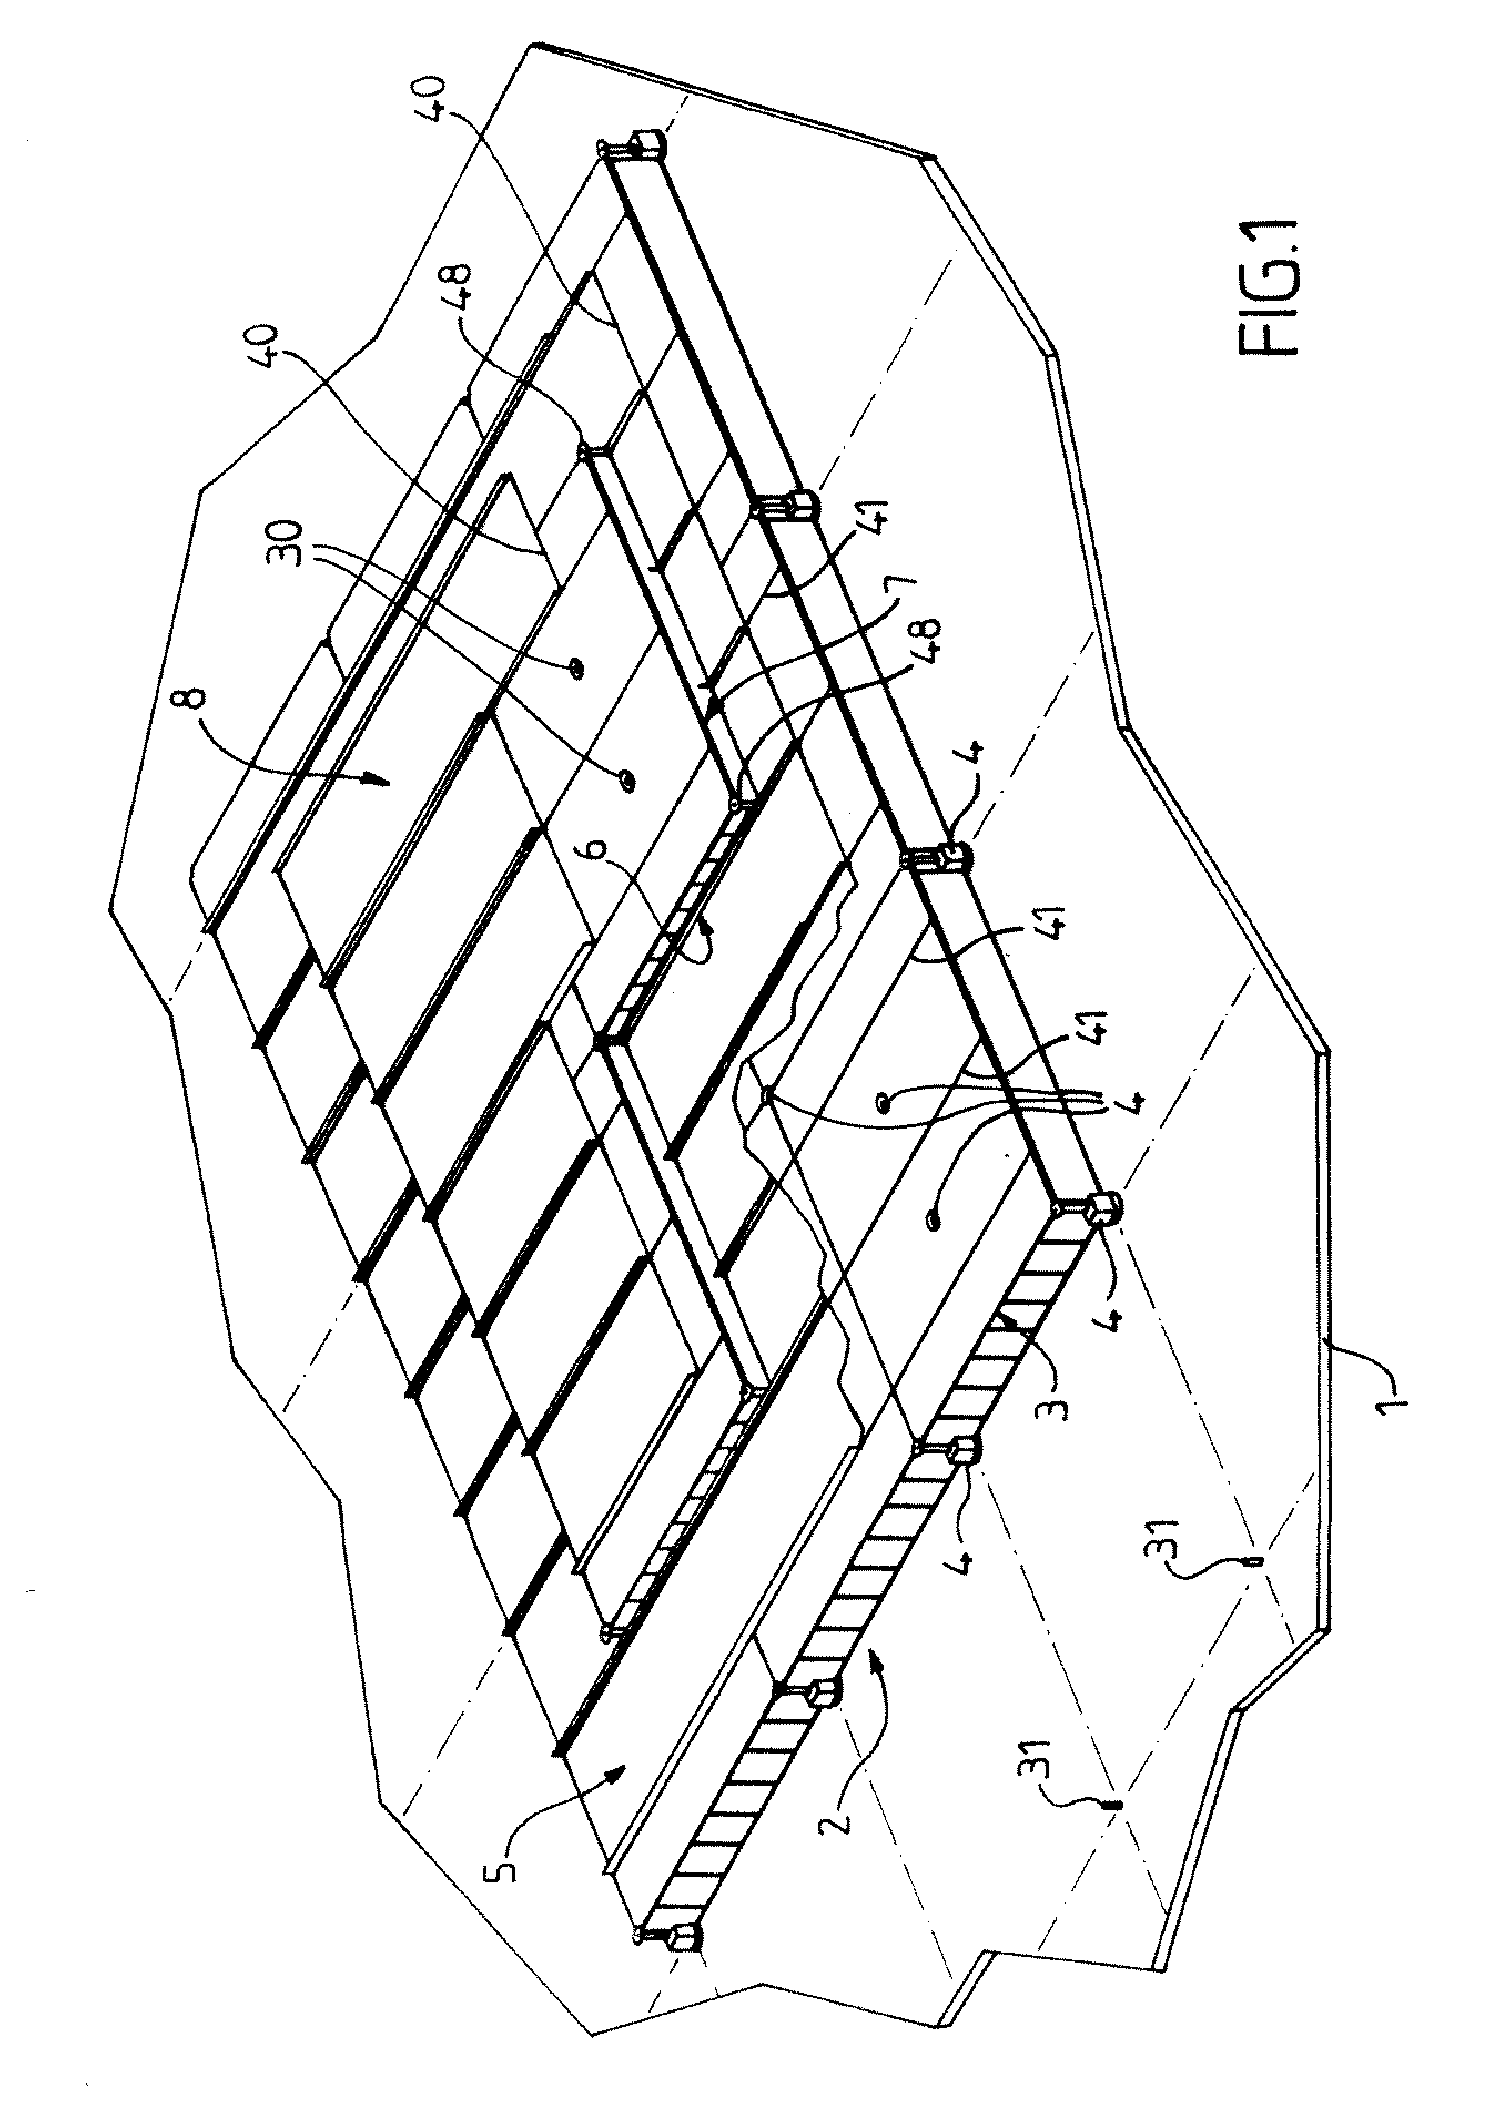 Sealed, thermally insulated tank with compression-resistant non-conducting elements